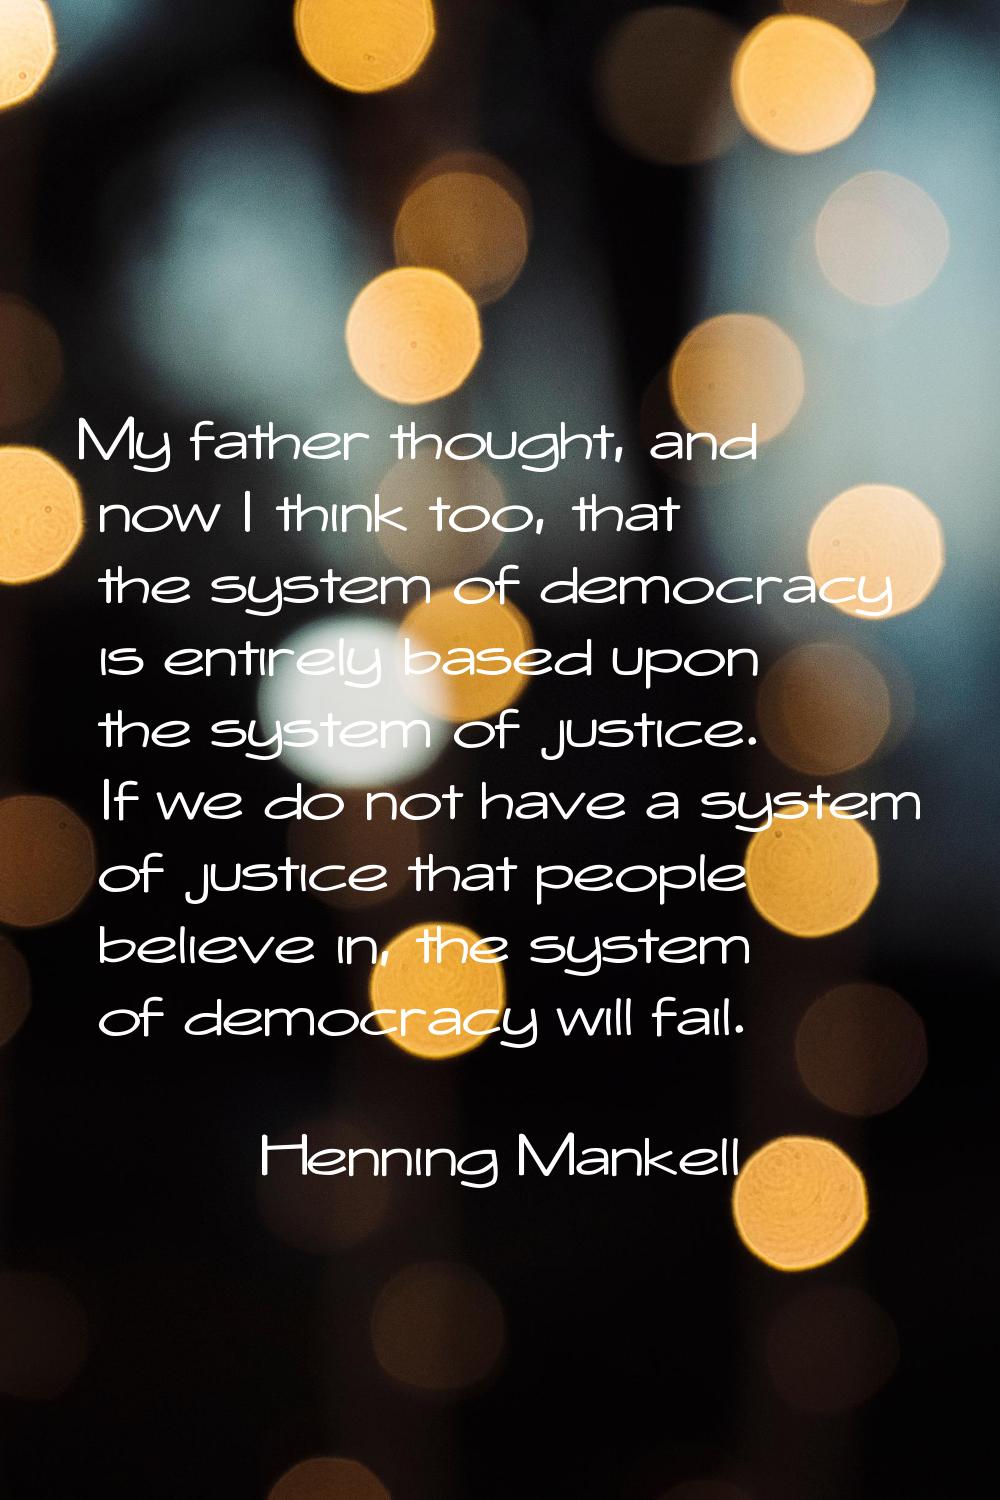 My father thought, and now I think too, that the system of democracy is entirely based upon the sys